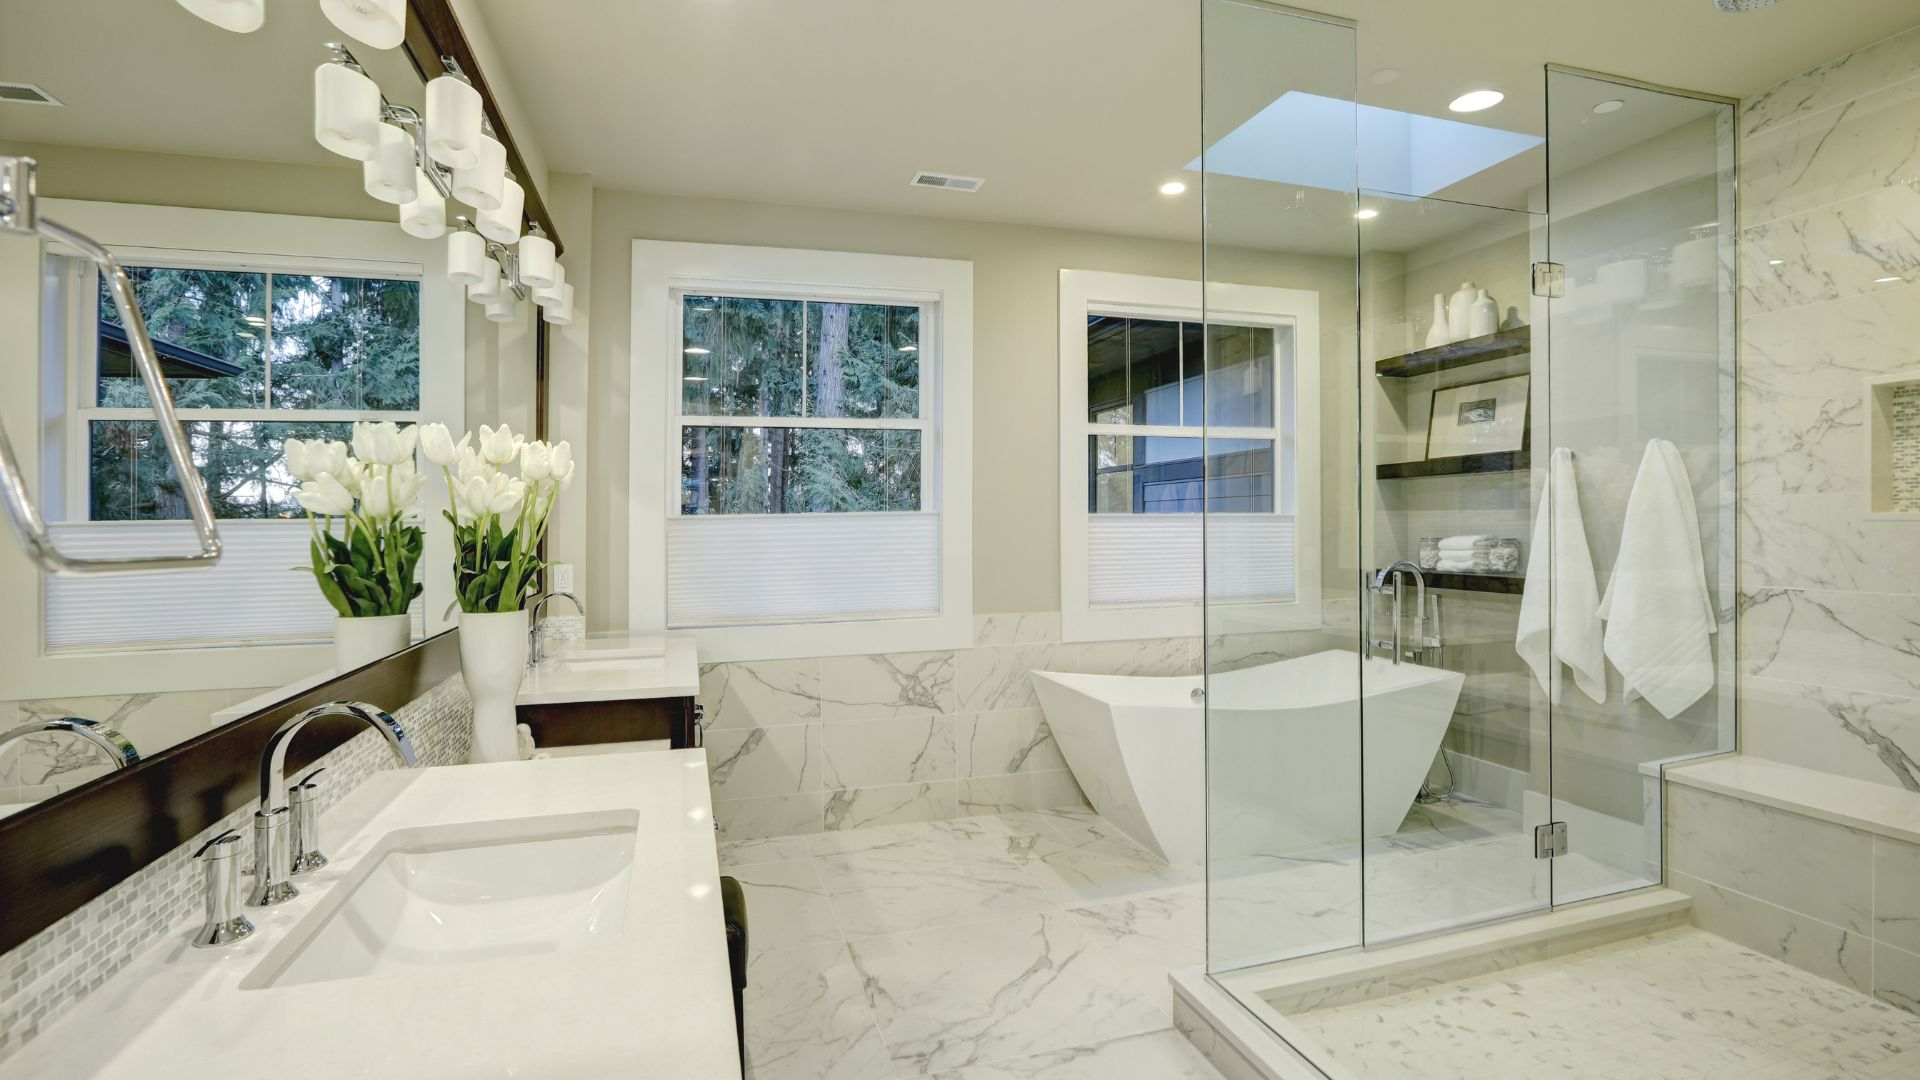 Factors That Affect the Cost of a Bathroom Remodel